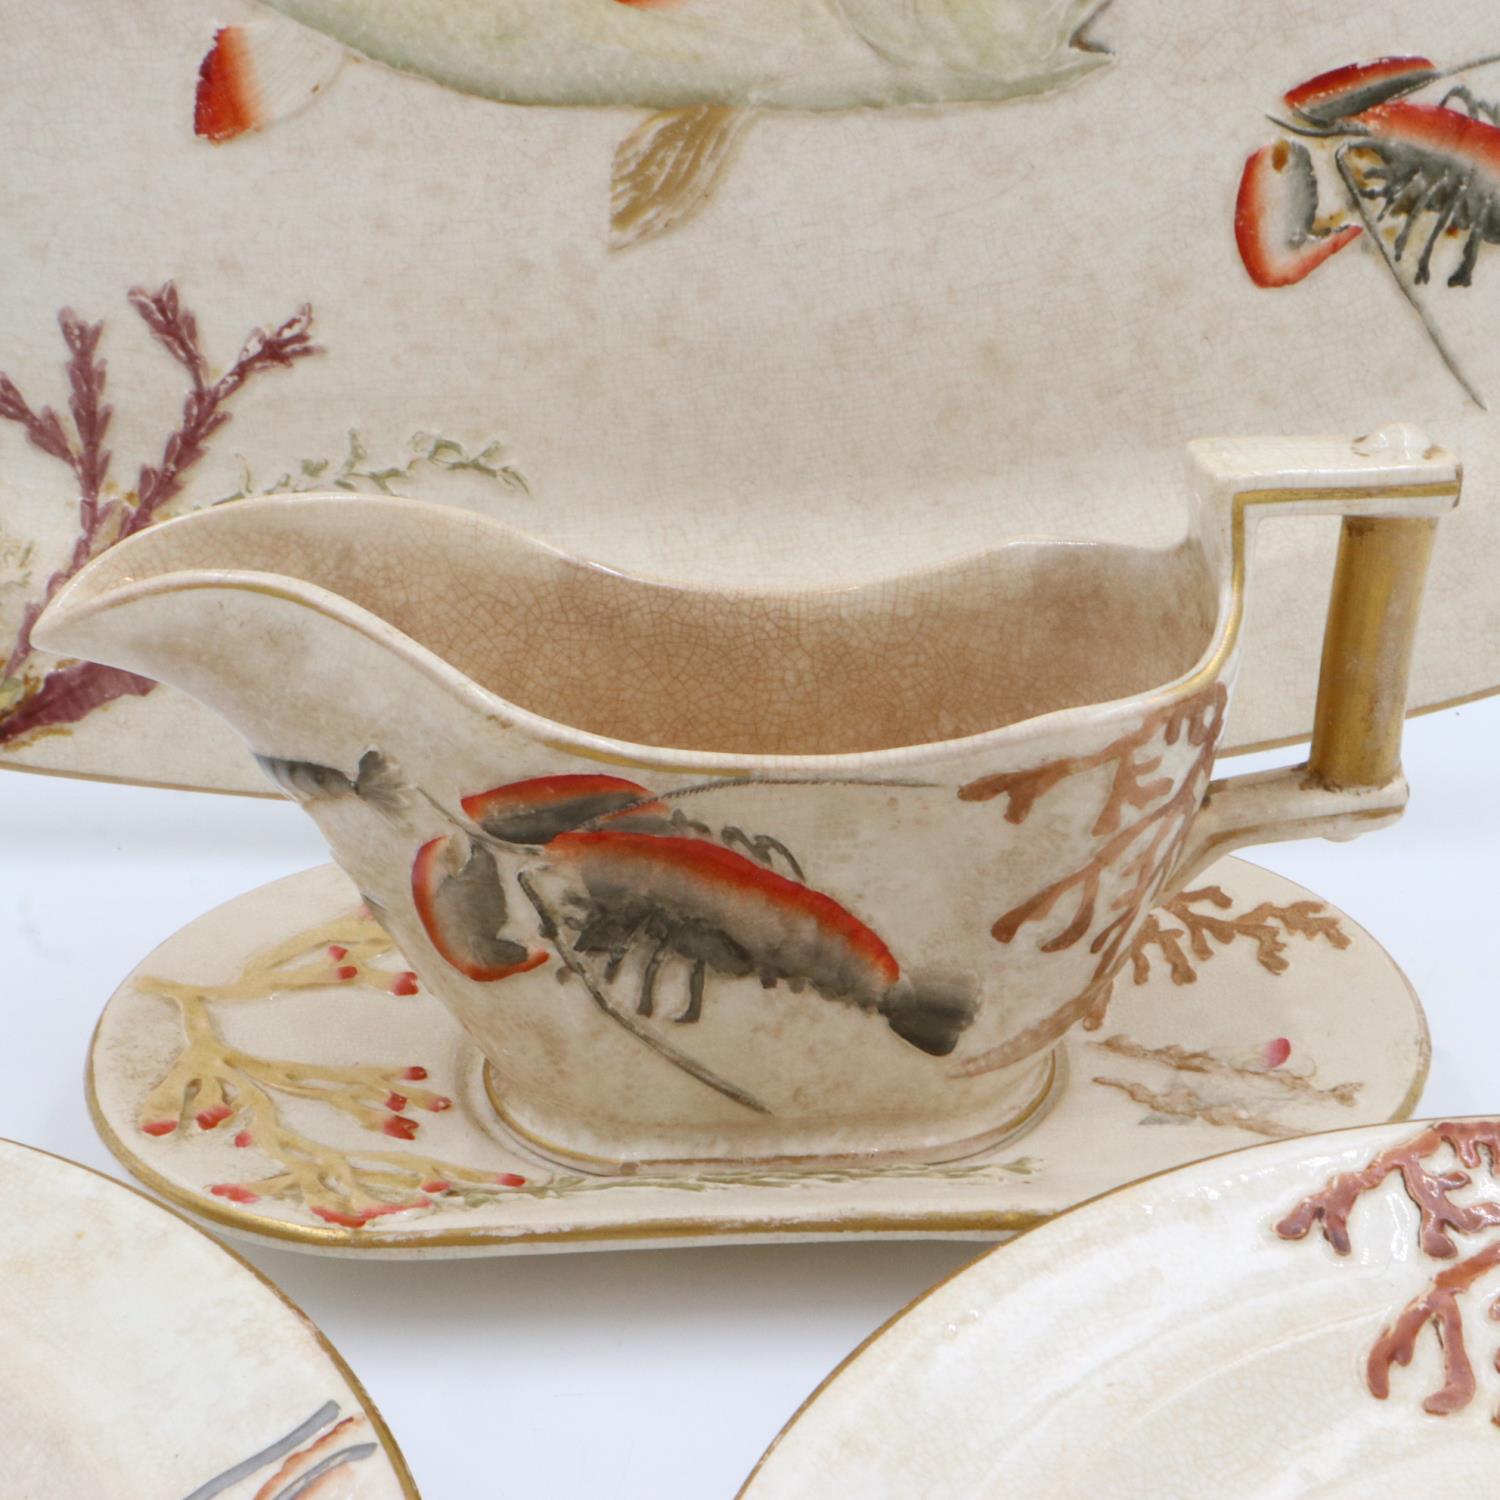 Nine relief moulded fish plates, one platter and one sauce bowl with stand, crazing and some cracks, - Image 2 of 4